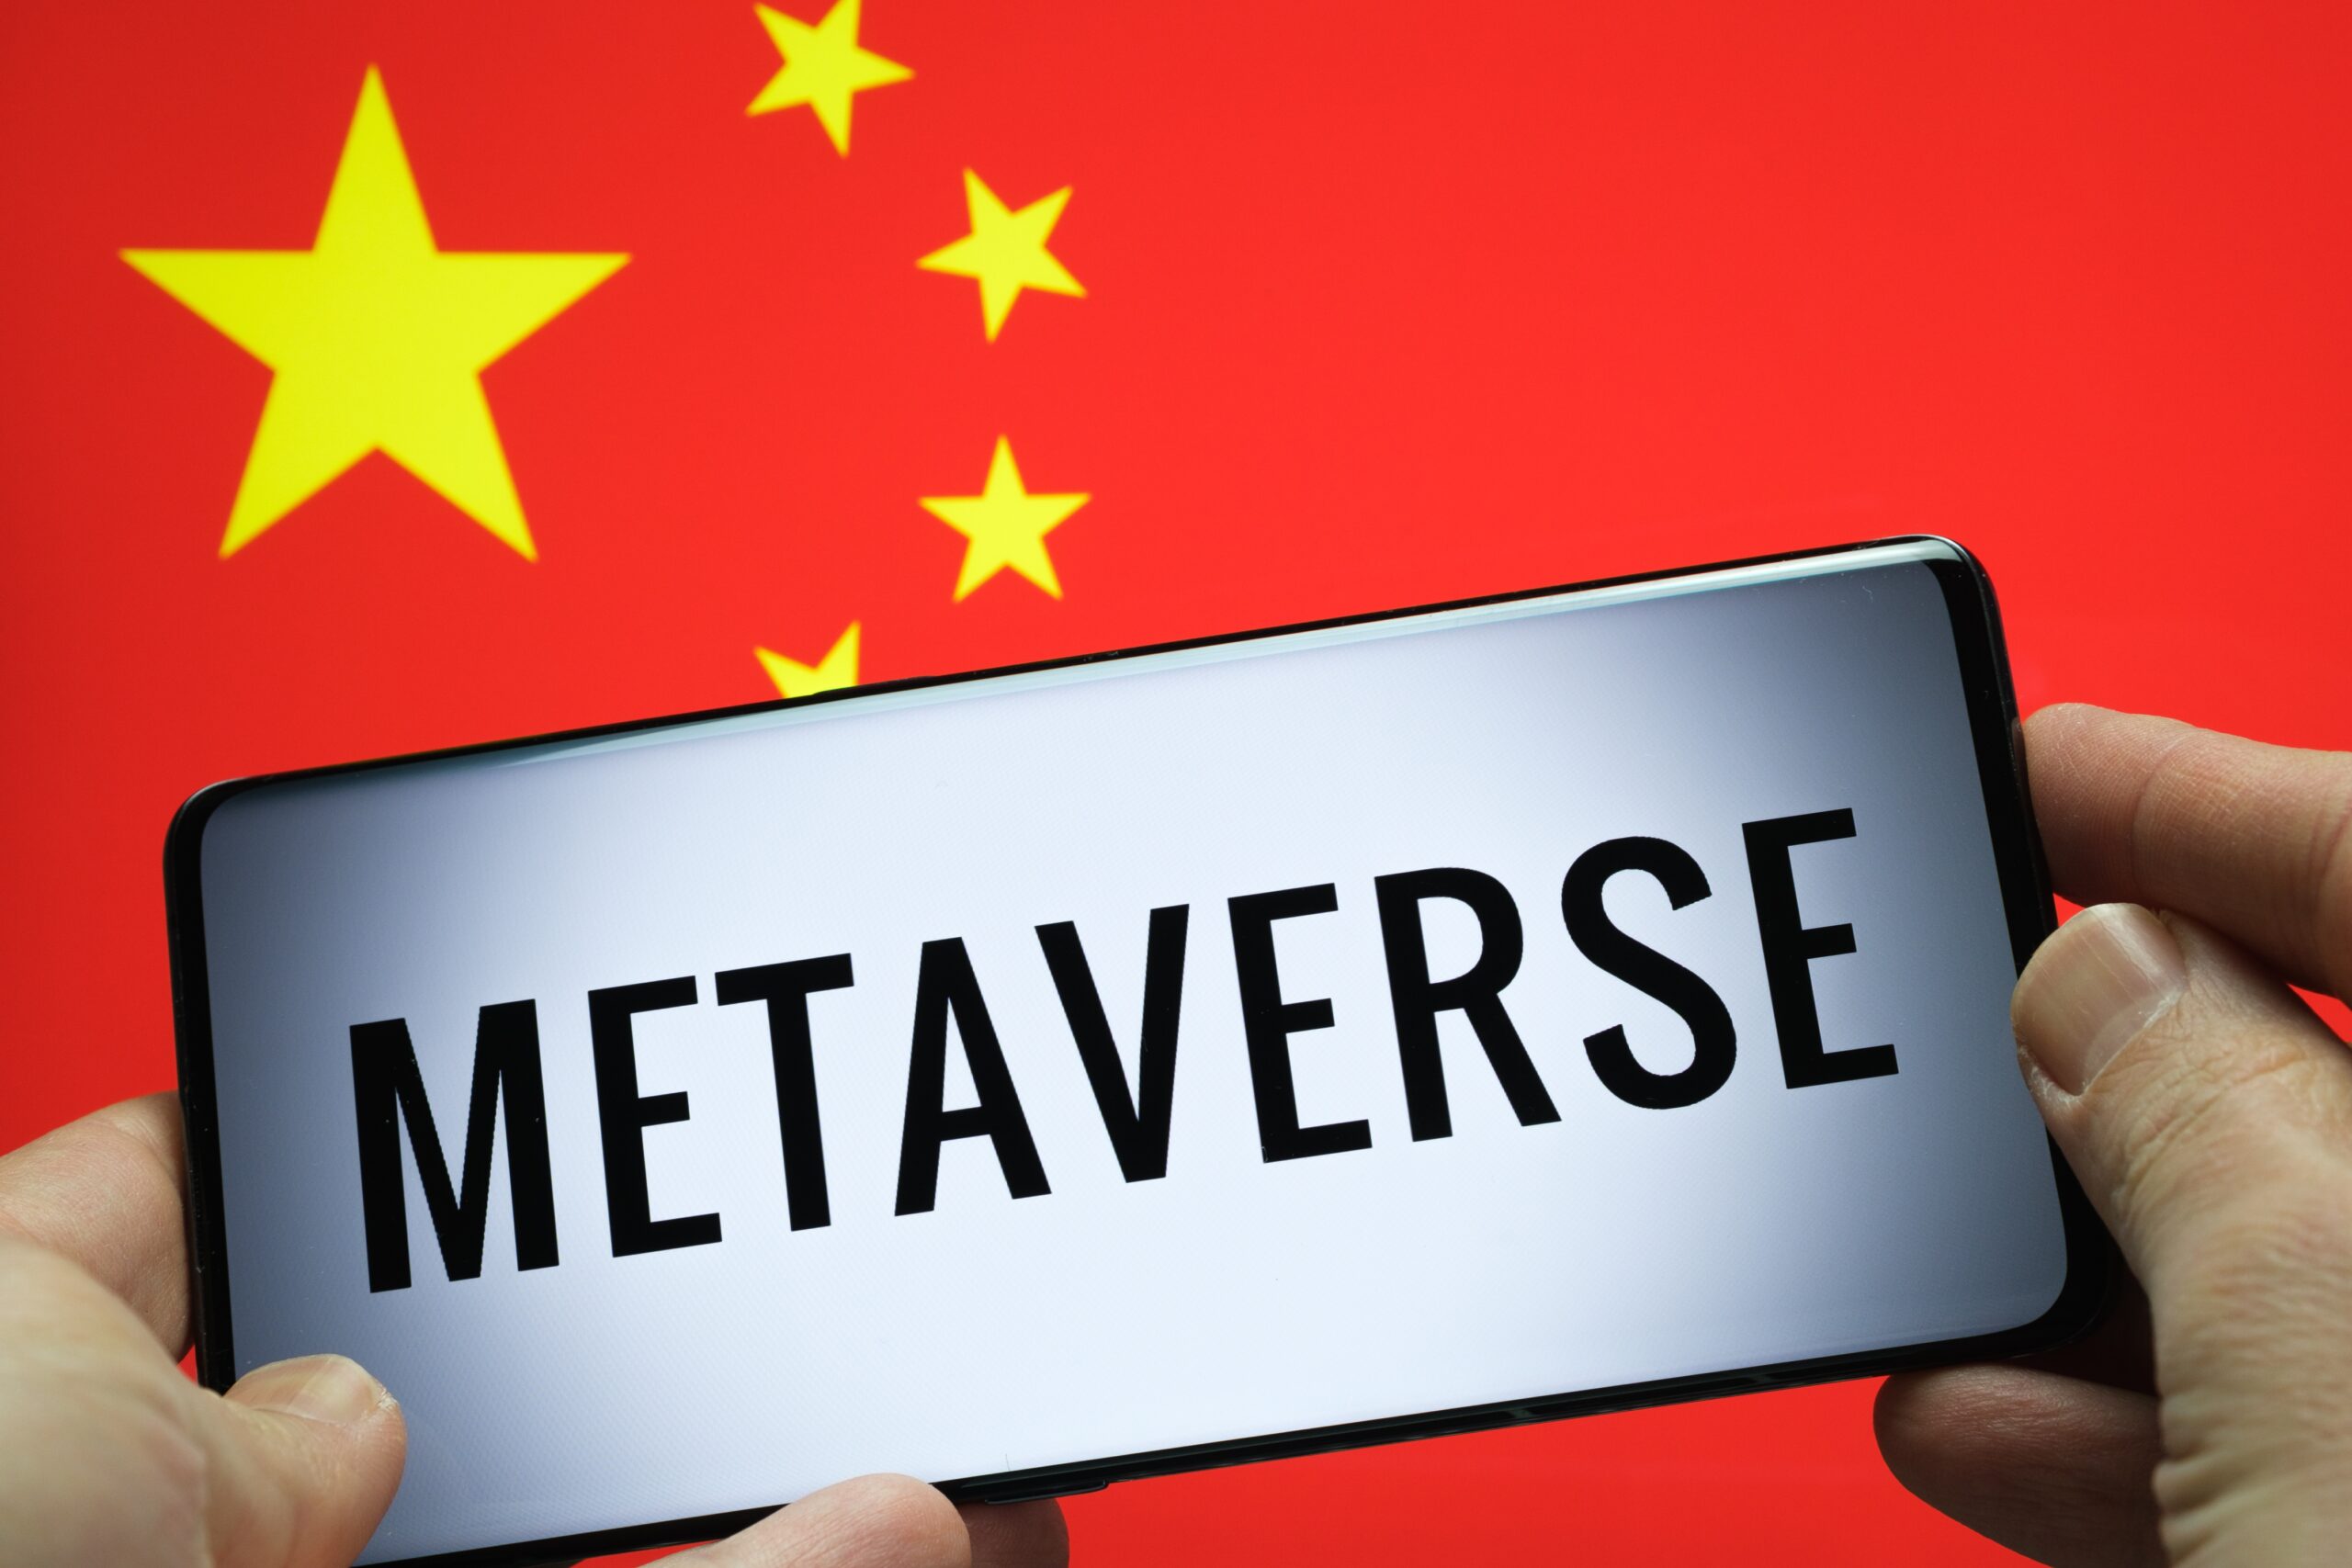 China's Shandong province expands to $20.5 billion in ambitious metaverse growth